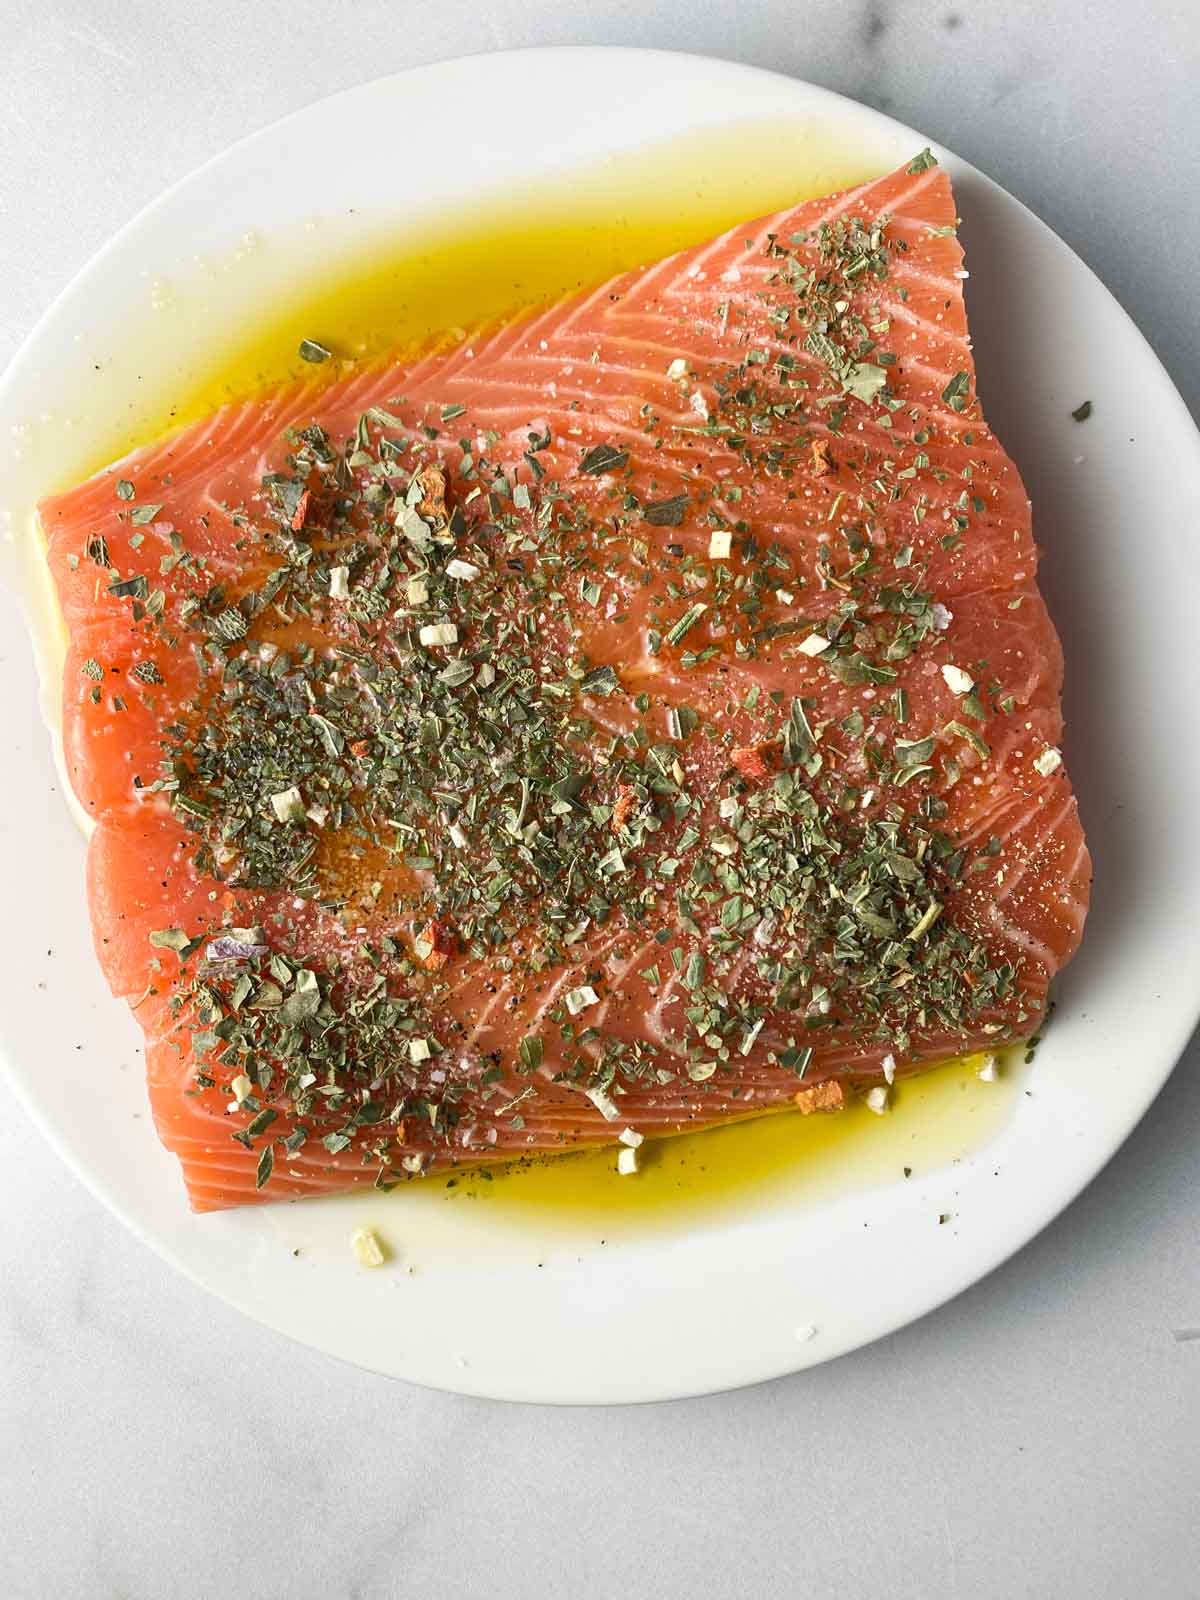 Salmon topped with Italian seasoning and olive oil.